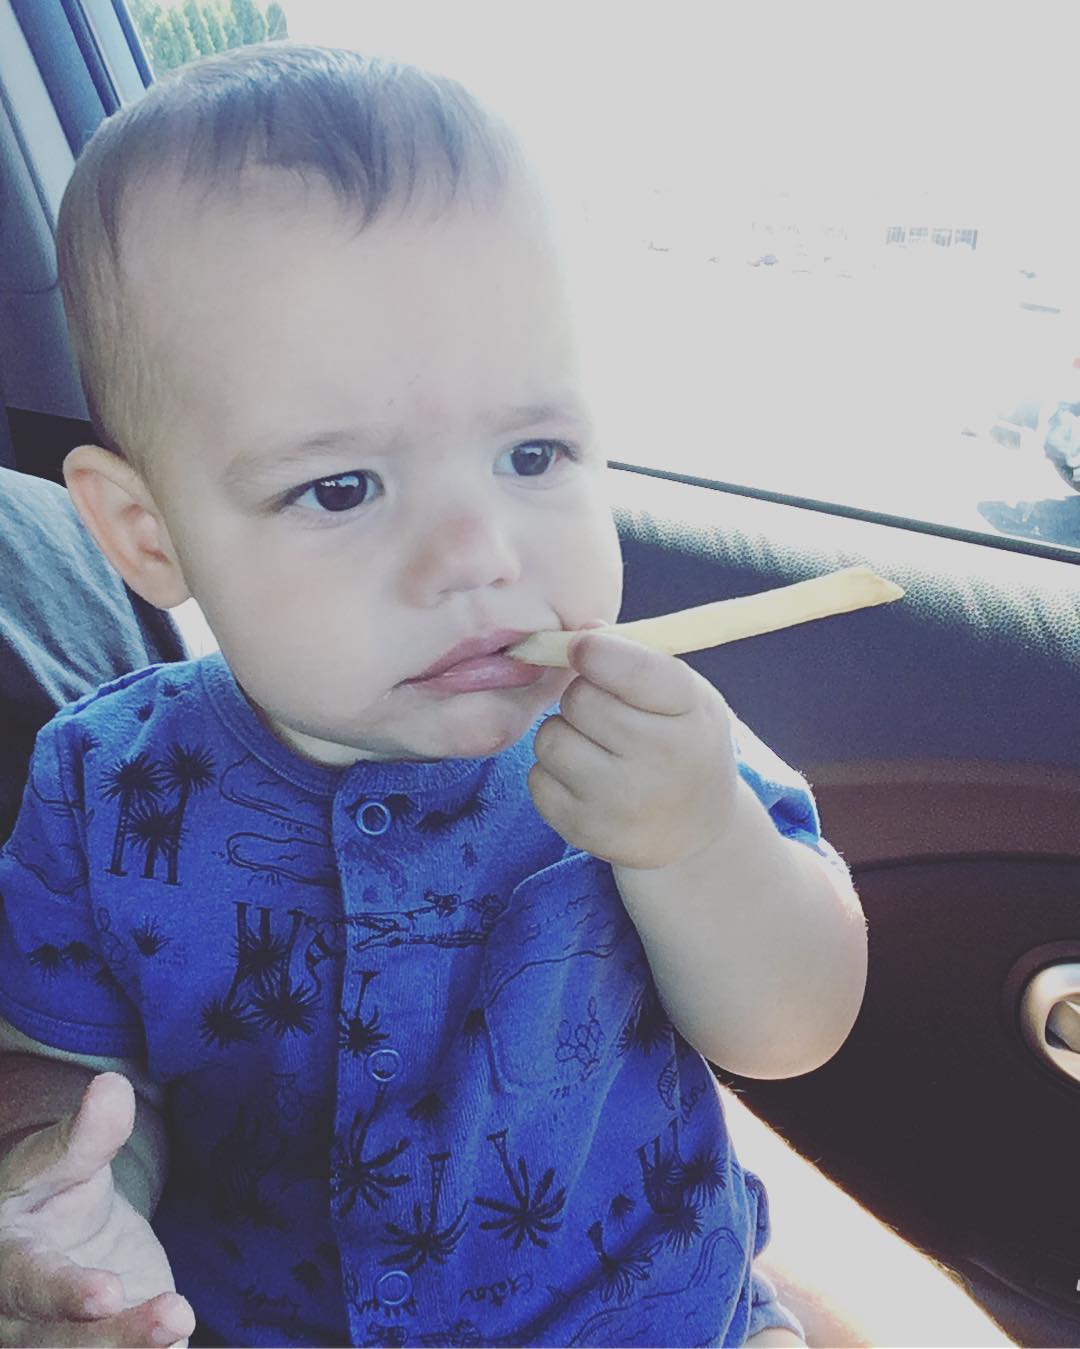 Fact: Some days all your moms got for ambition is Fries in the car in the parking lot...